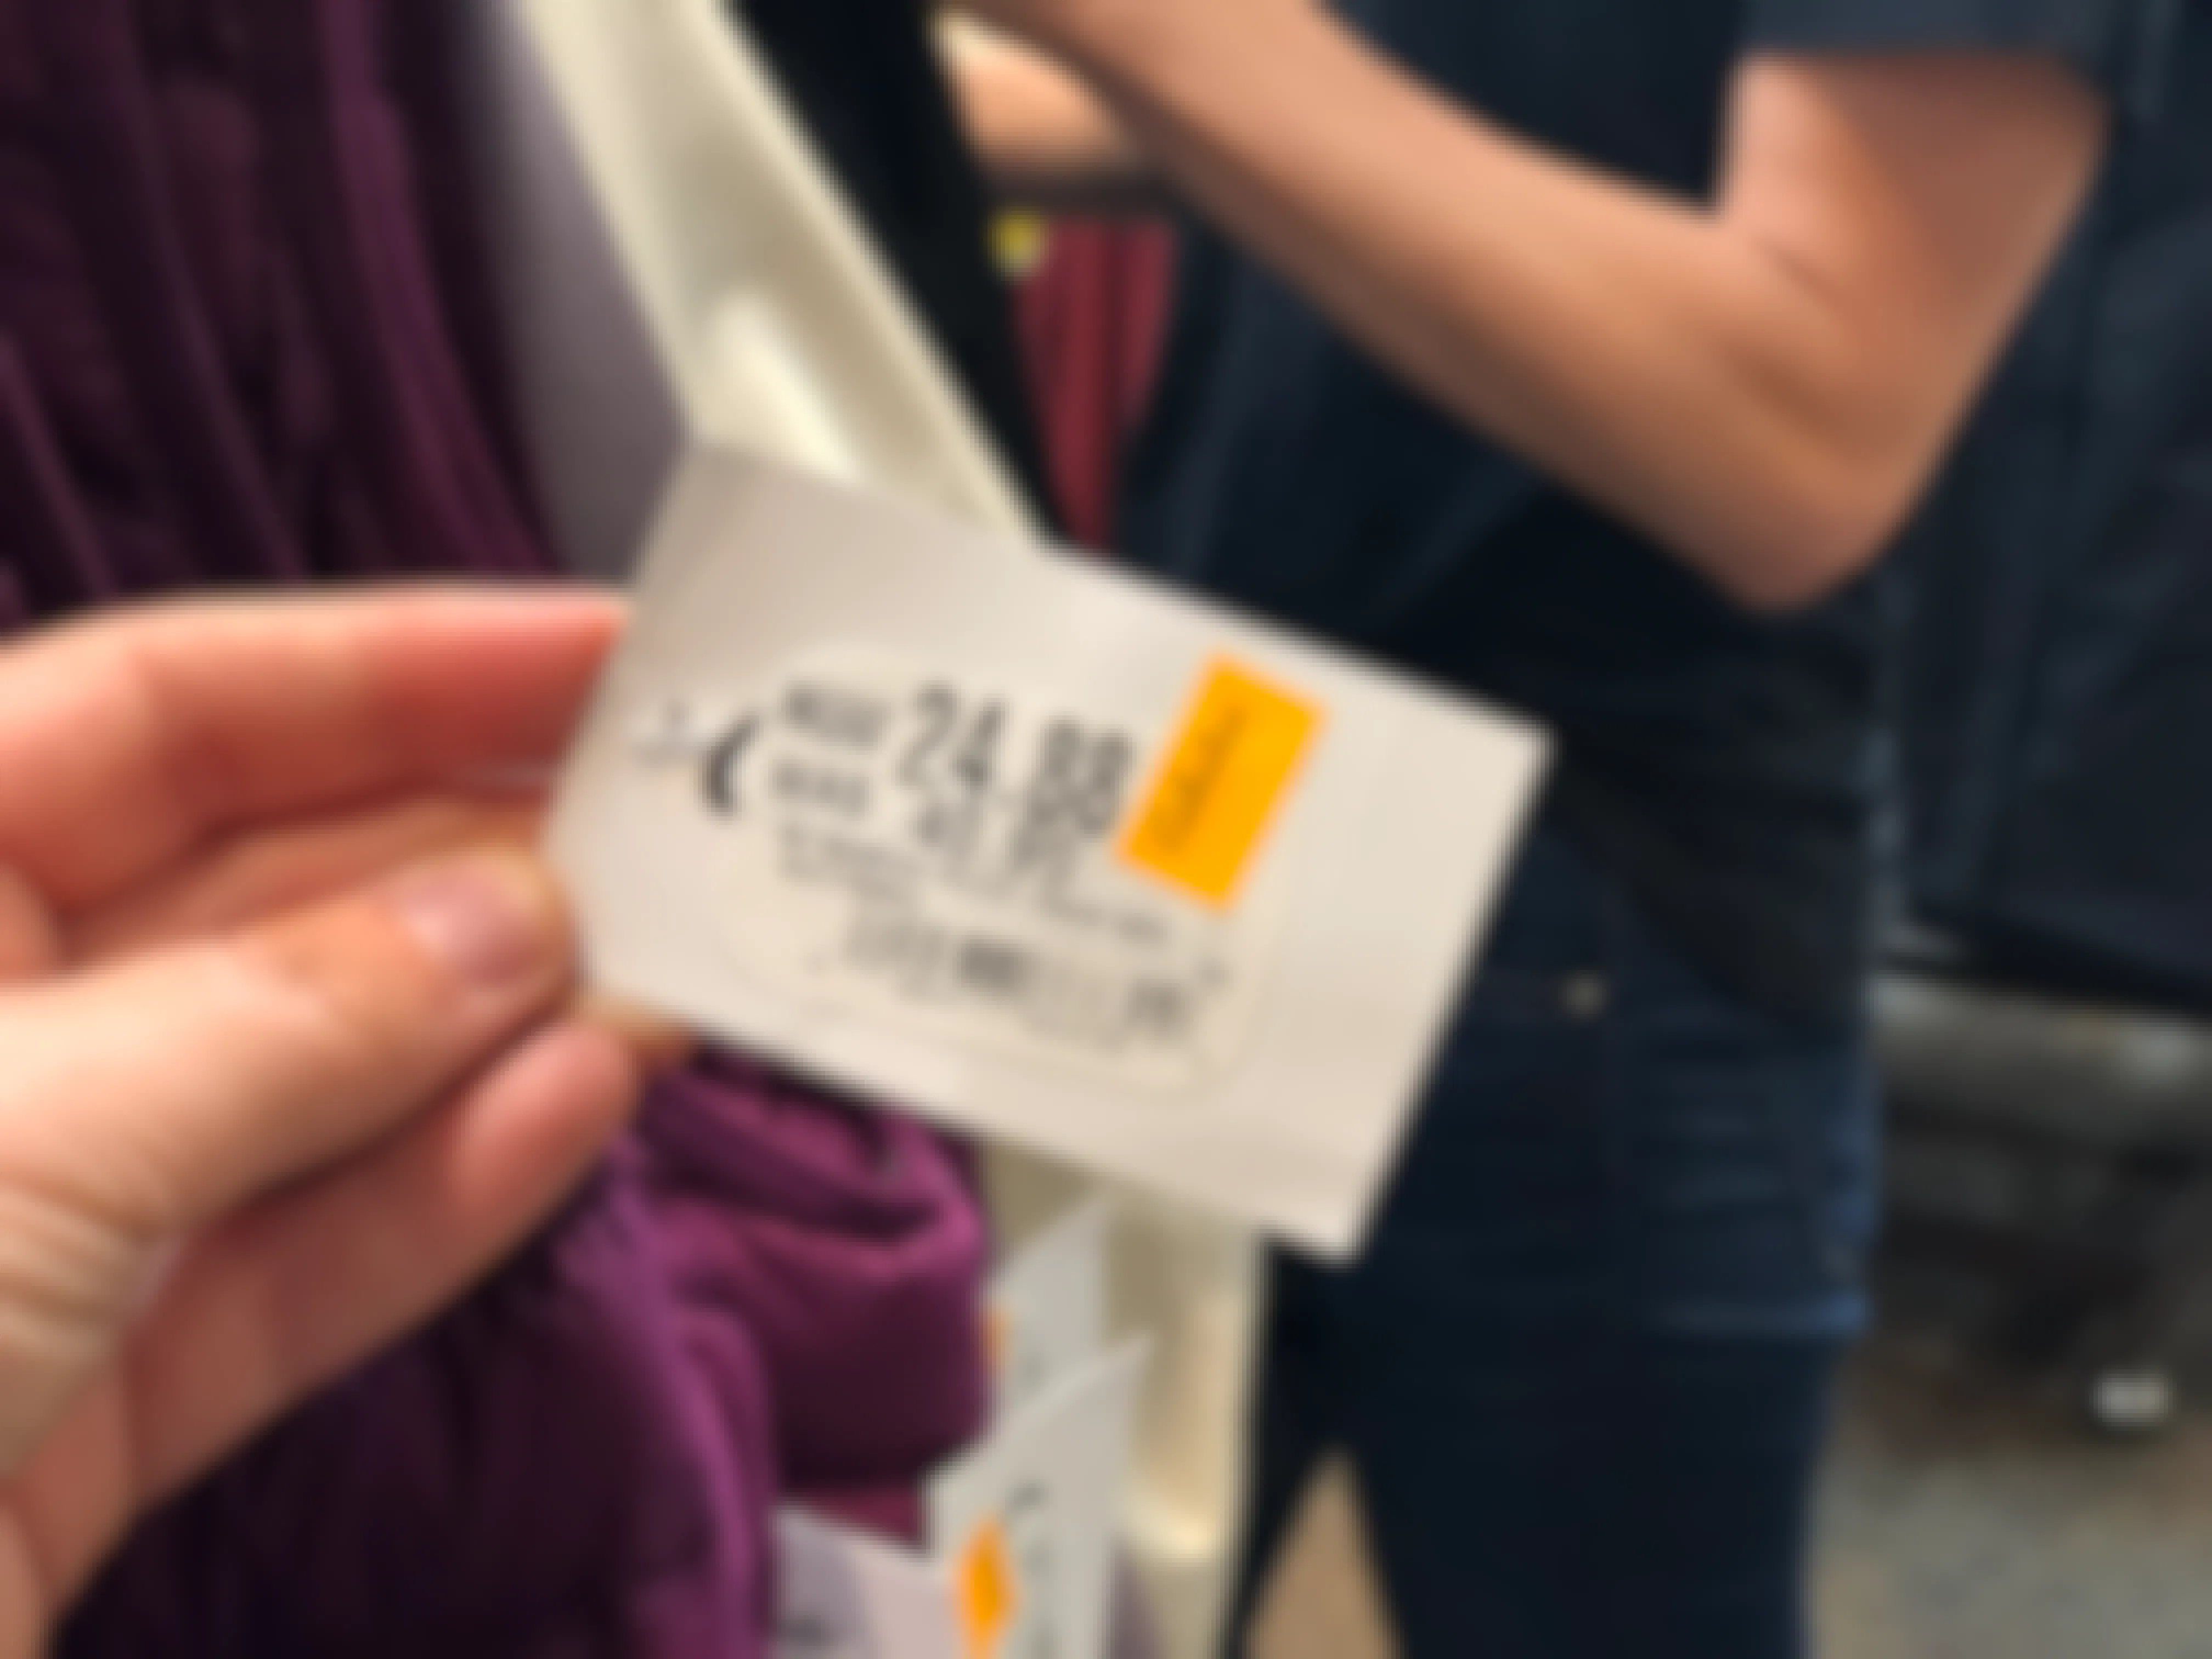 A person's hand holding a price tag of a clearance item at Cabela's.